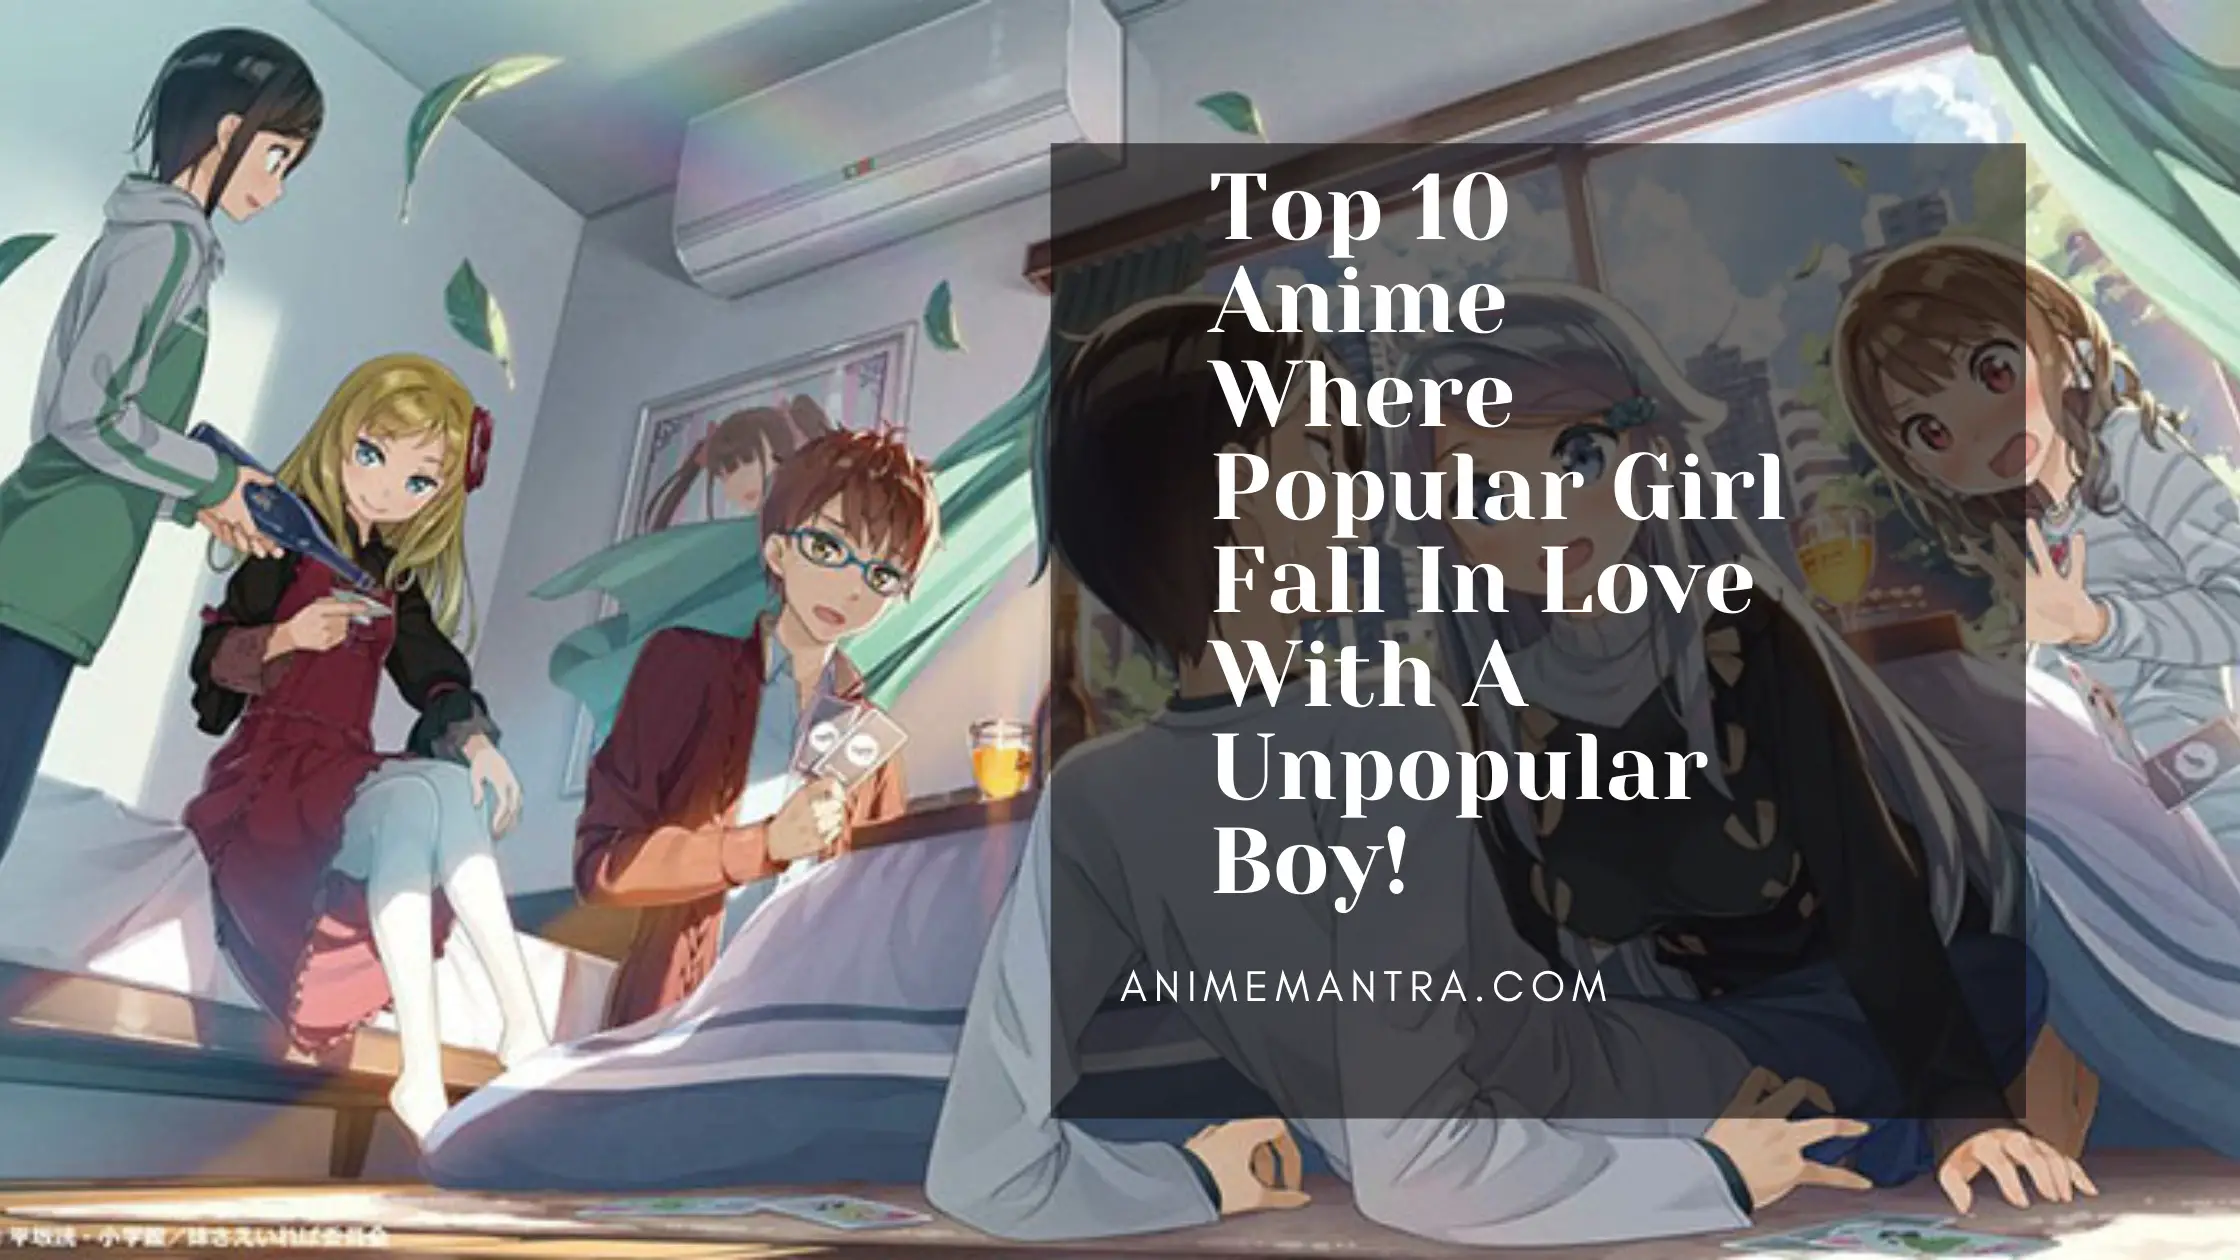 Popular guy falls in love with unpopular girl movies